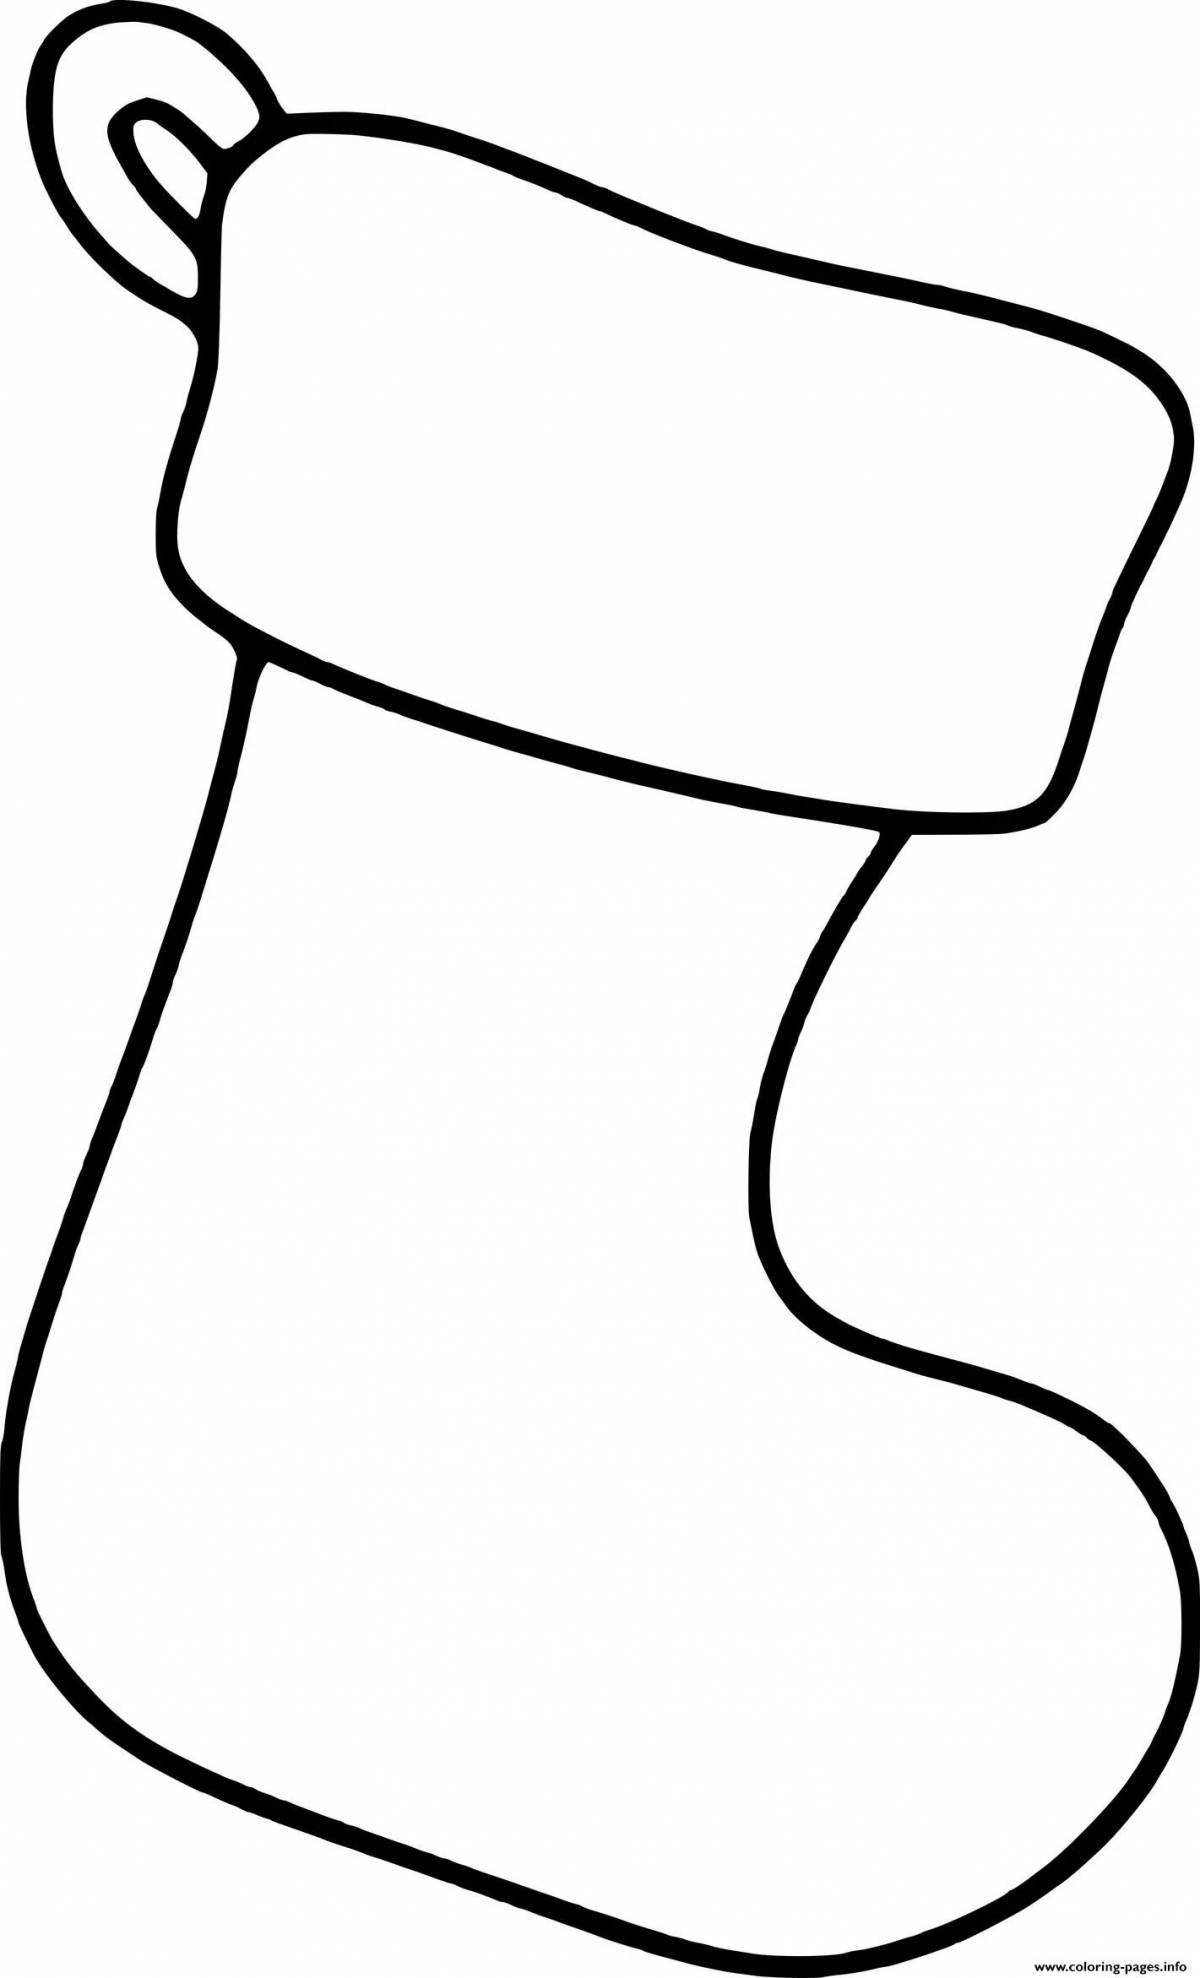 Adorable stocking coloring page